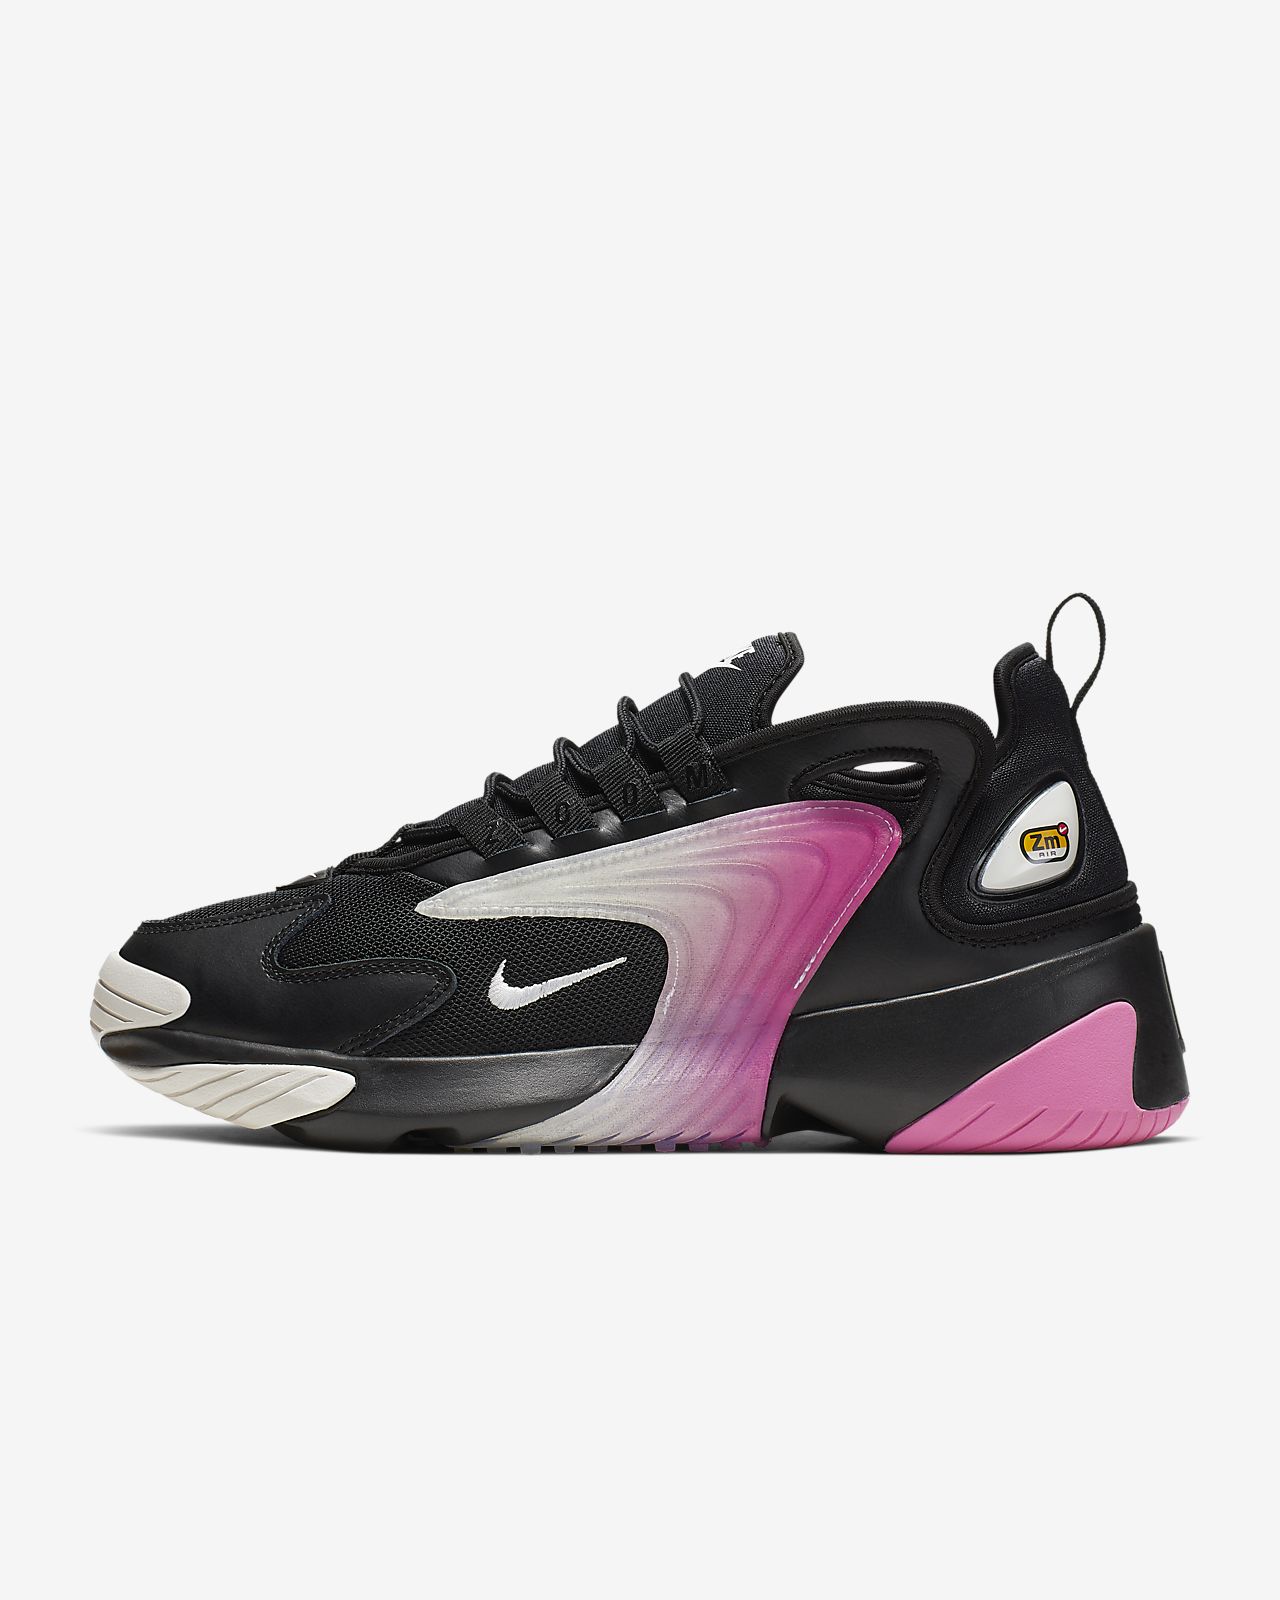 Nike Zoom Black And Pink Shop Clothing Shoes Online